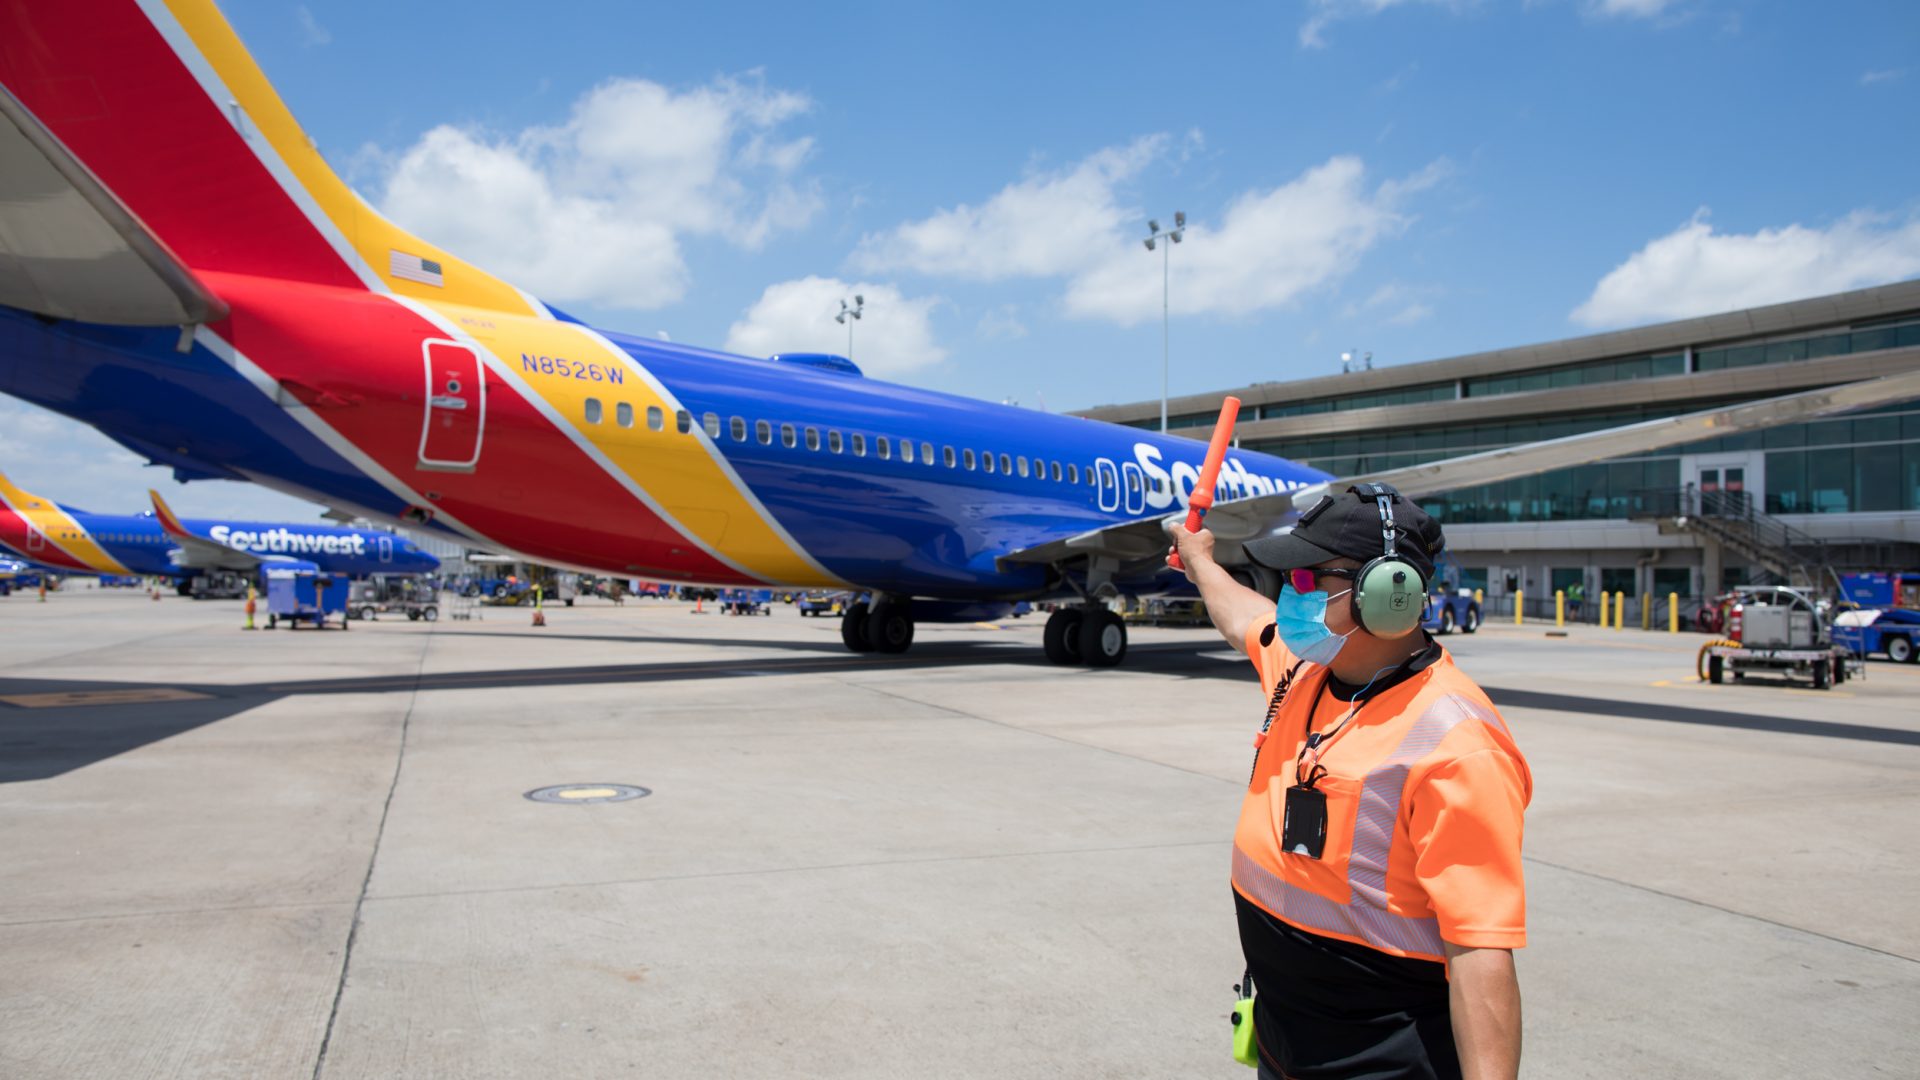 Solved: Are you ready to take flight? The Flight Attendant - The  Southwest Airlines Community